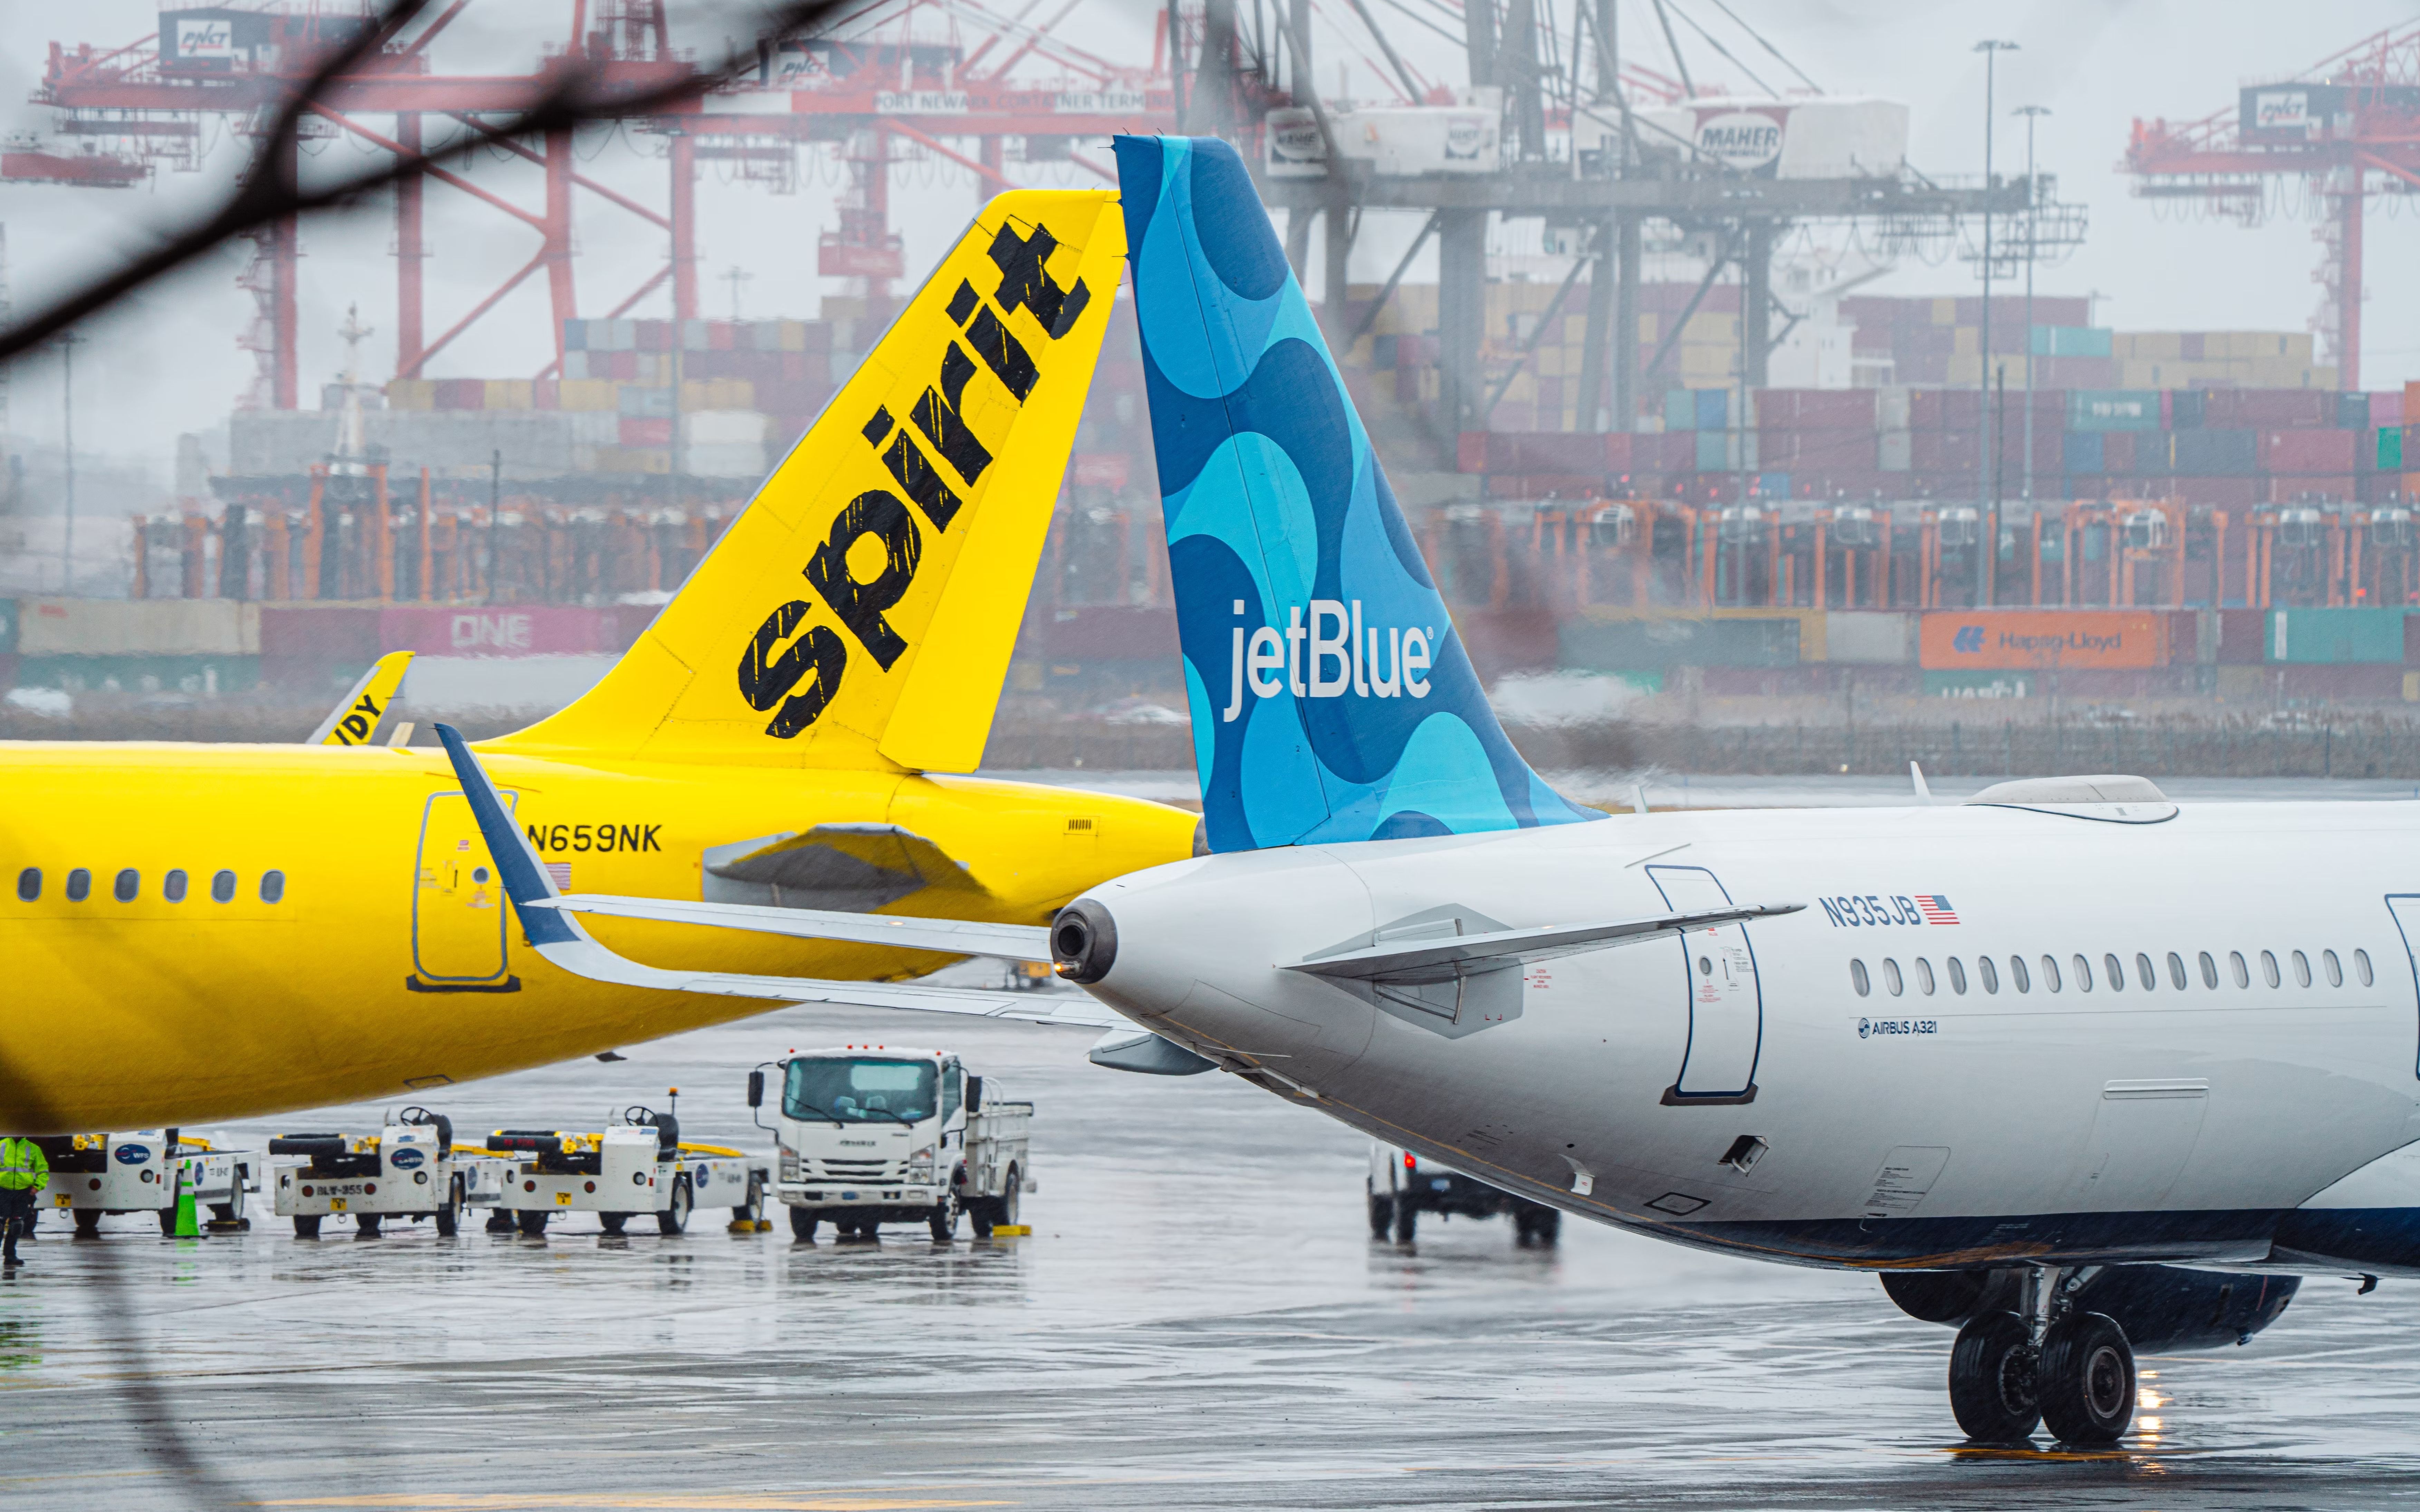 JetBlue and Spirit Airbus Aircraft side by side on an airport apron.